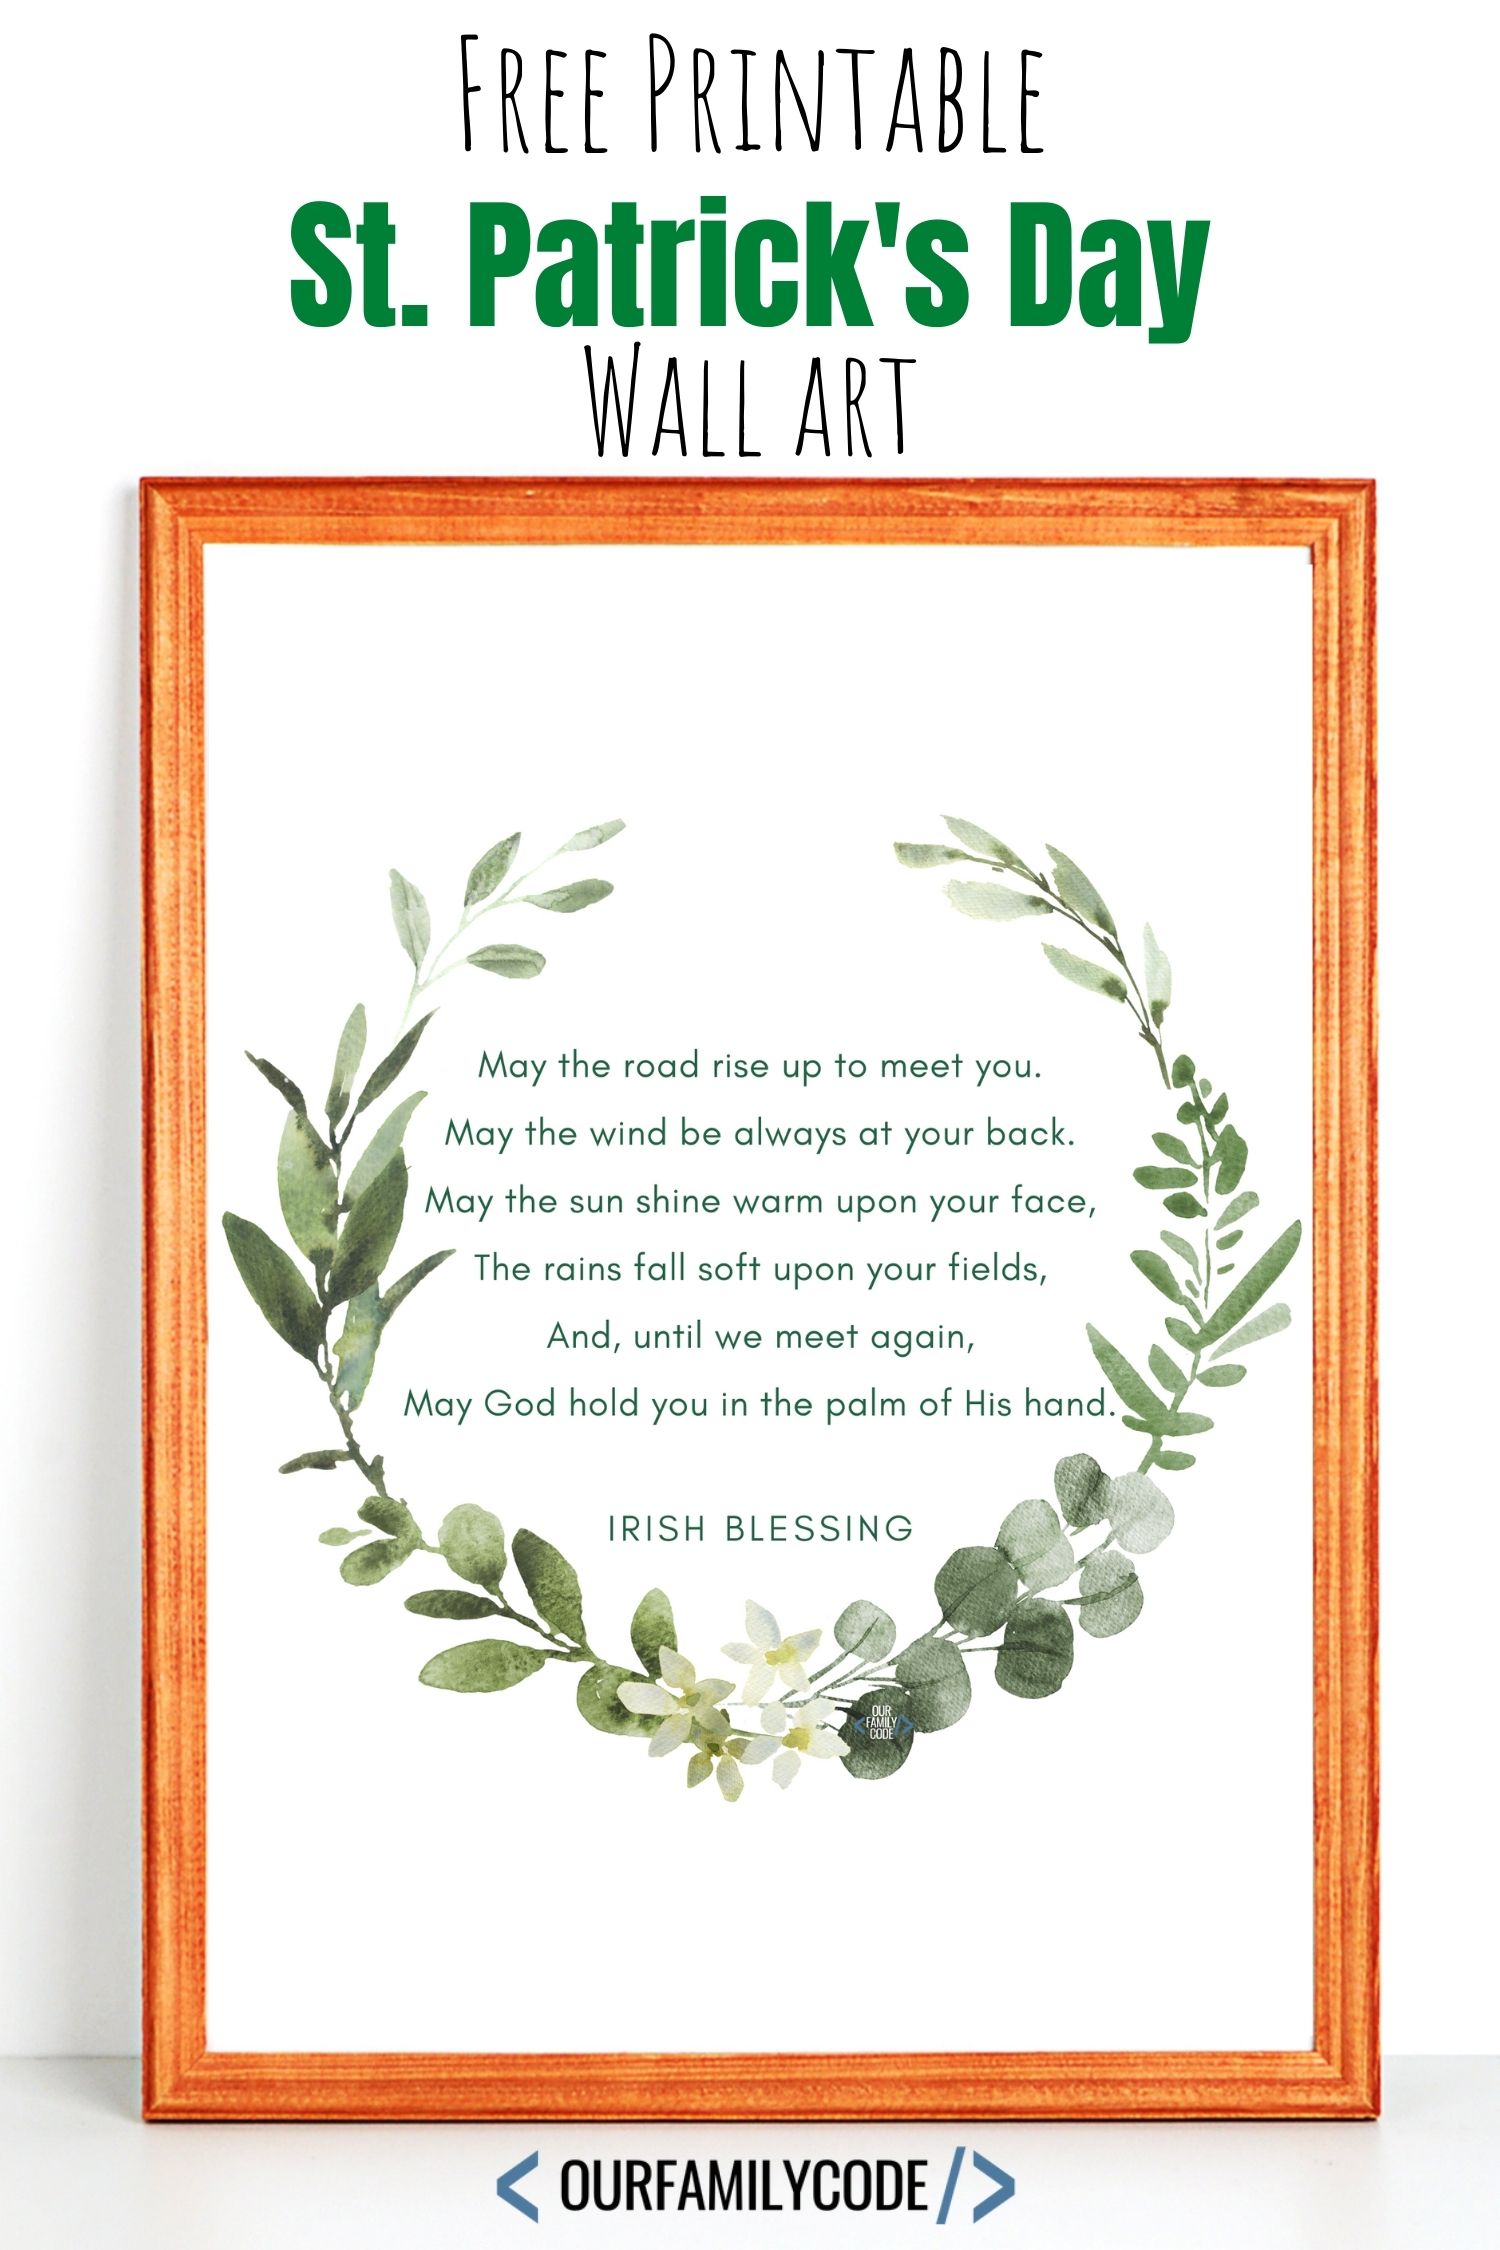 A picture of a printable wall art image with the Irish Blessing "May the Road Rise up to Meet You".